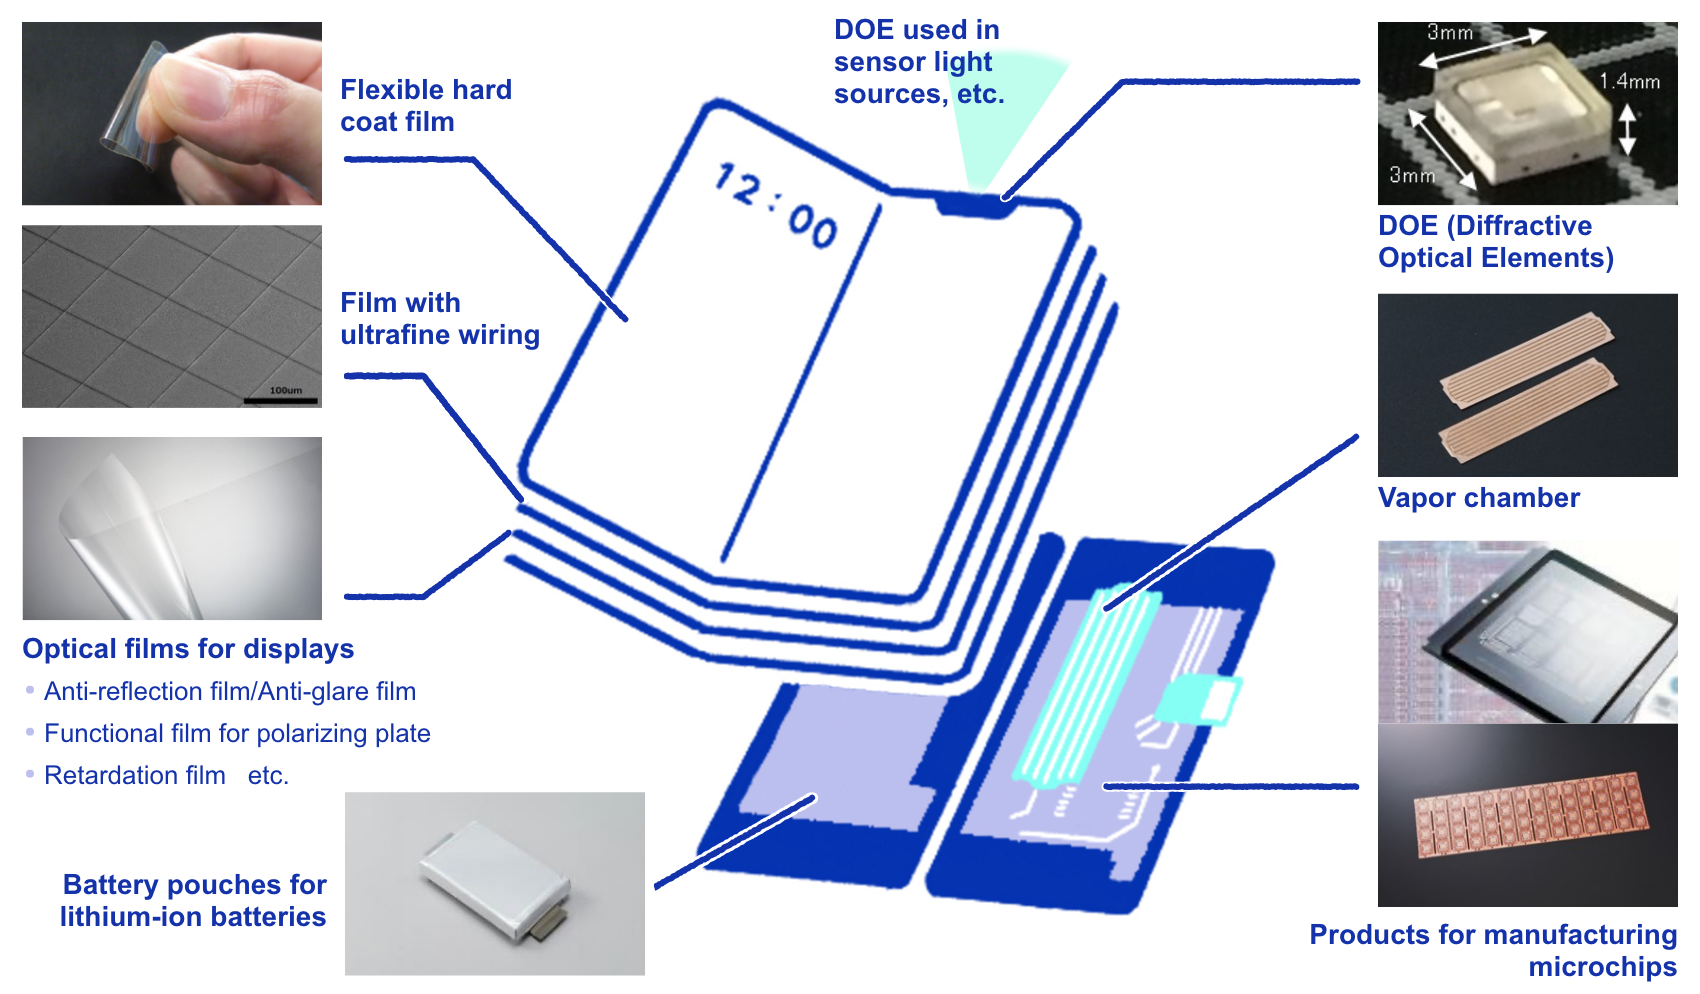 Illustration depicting the use of various DNP products in the components of a smartphone.